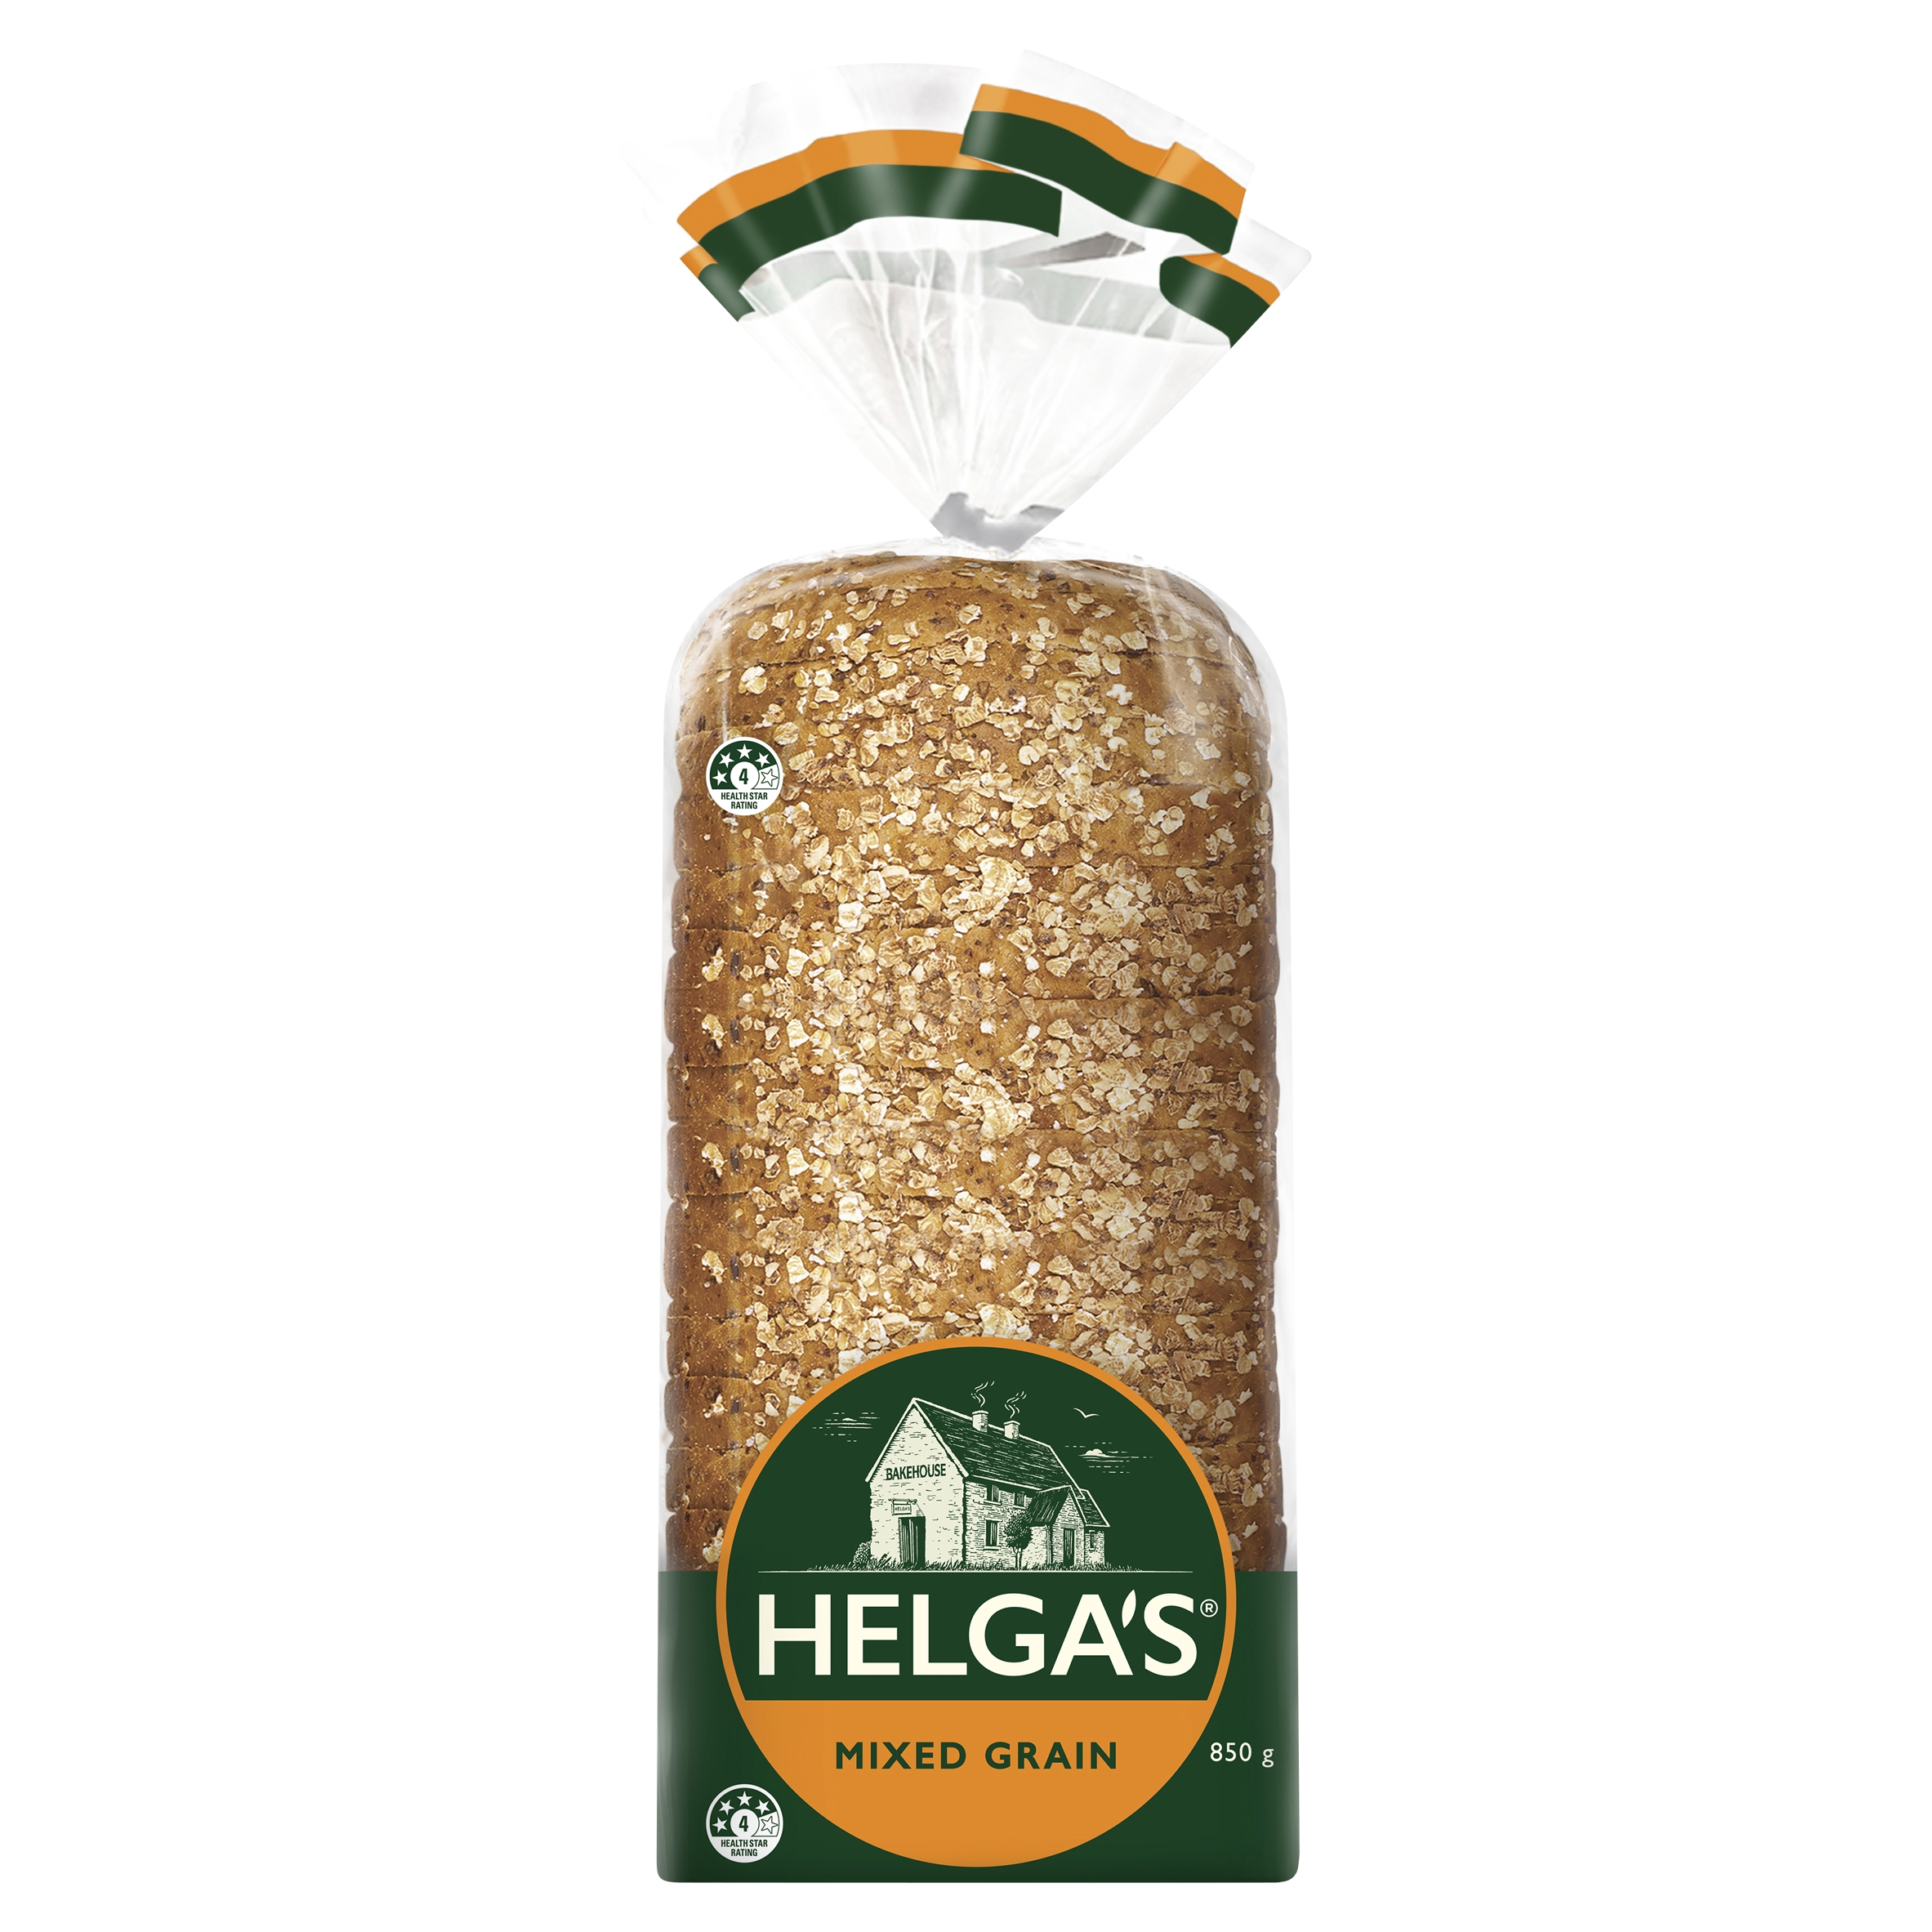 Helgas Loaf Mixed Grain 850 g product photo